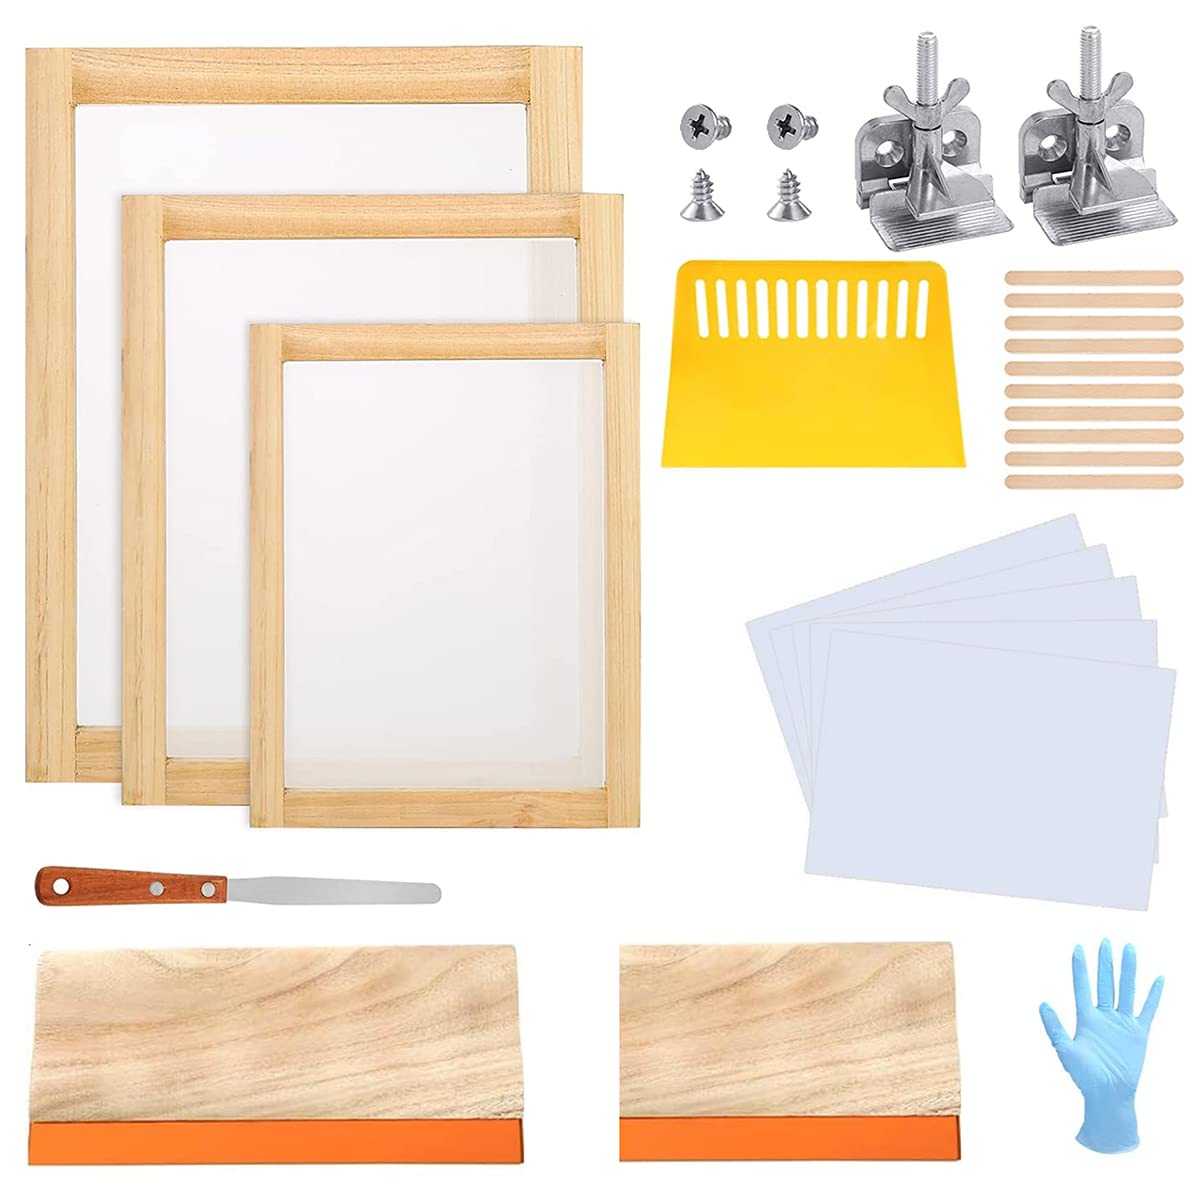 19 x 22 Pre-Stretched Wooden Frame  AA Print Supply — Screen Print Supply